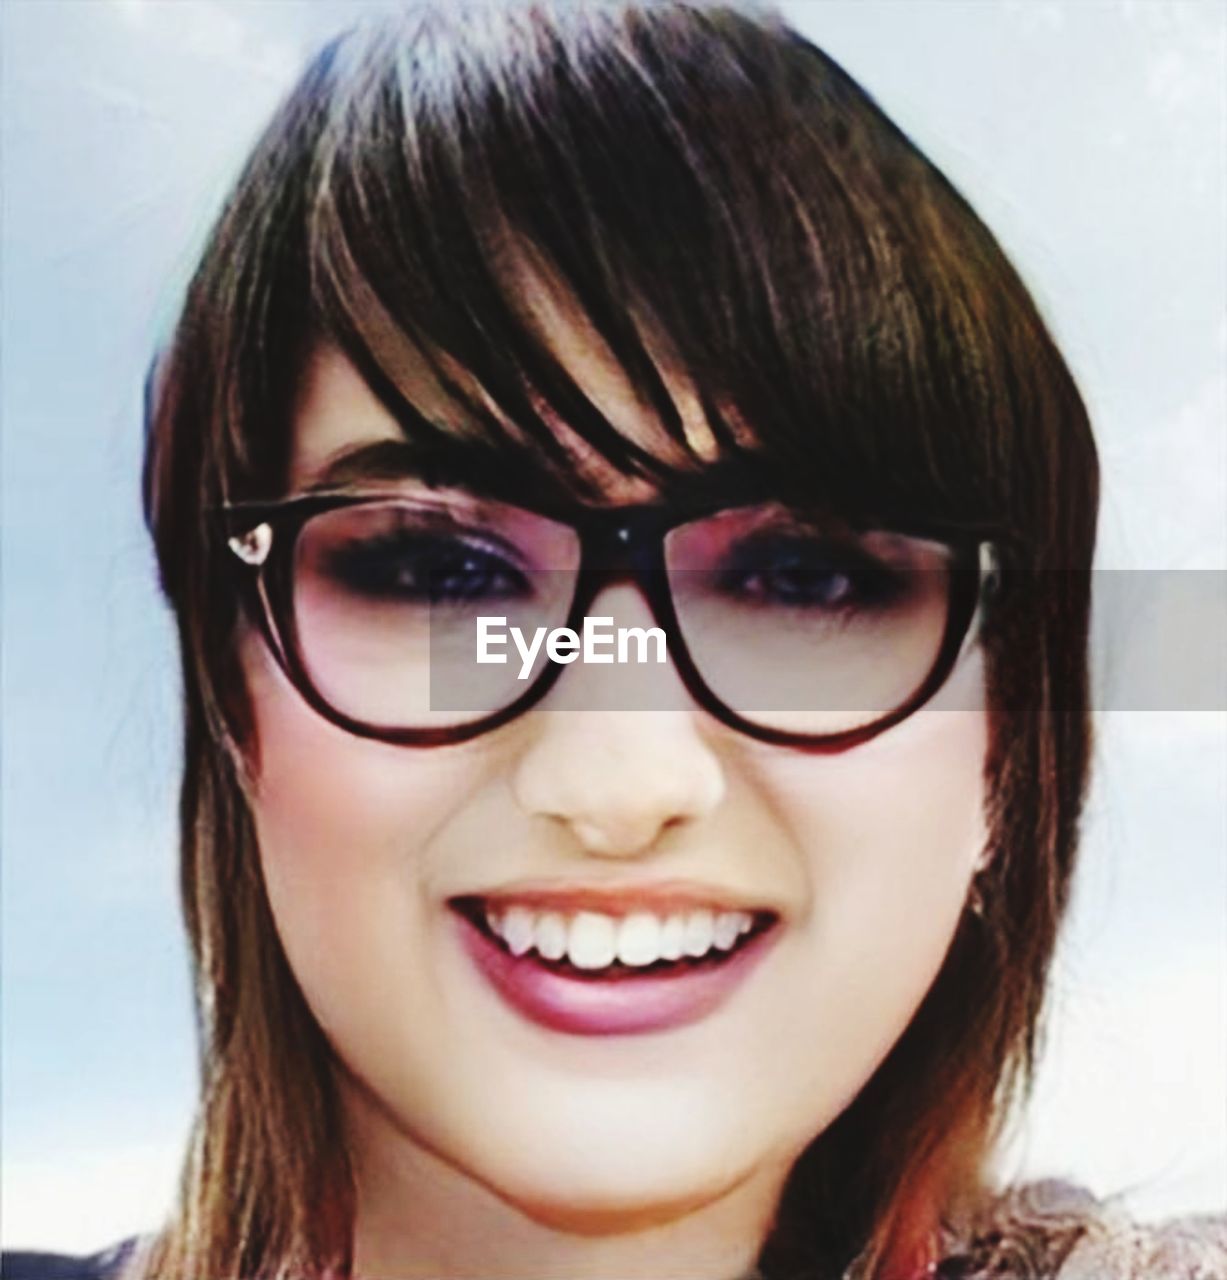 CLOSE-UP PORTRAIT OF SMILING YOUNG WOMAN WITH EYEGLASSES